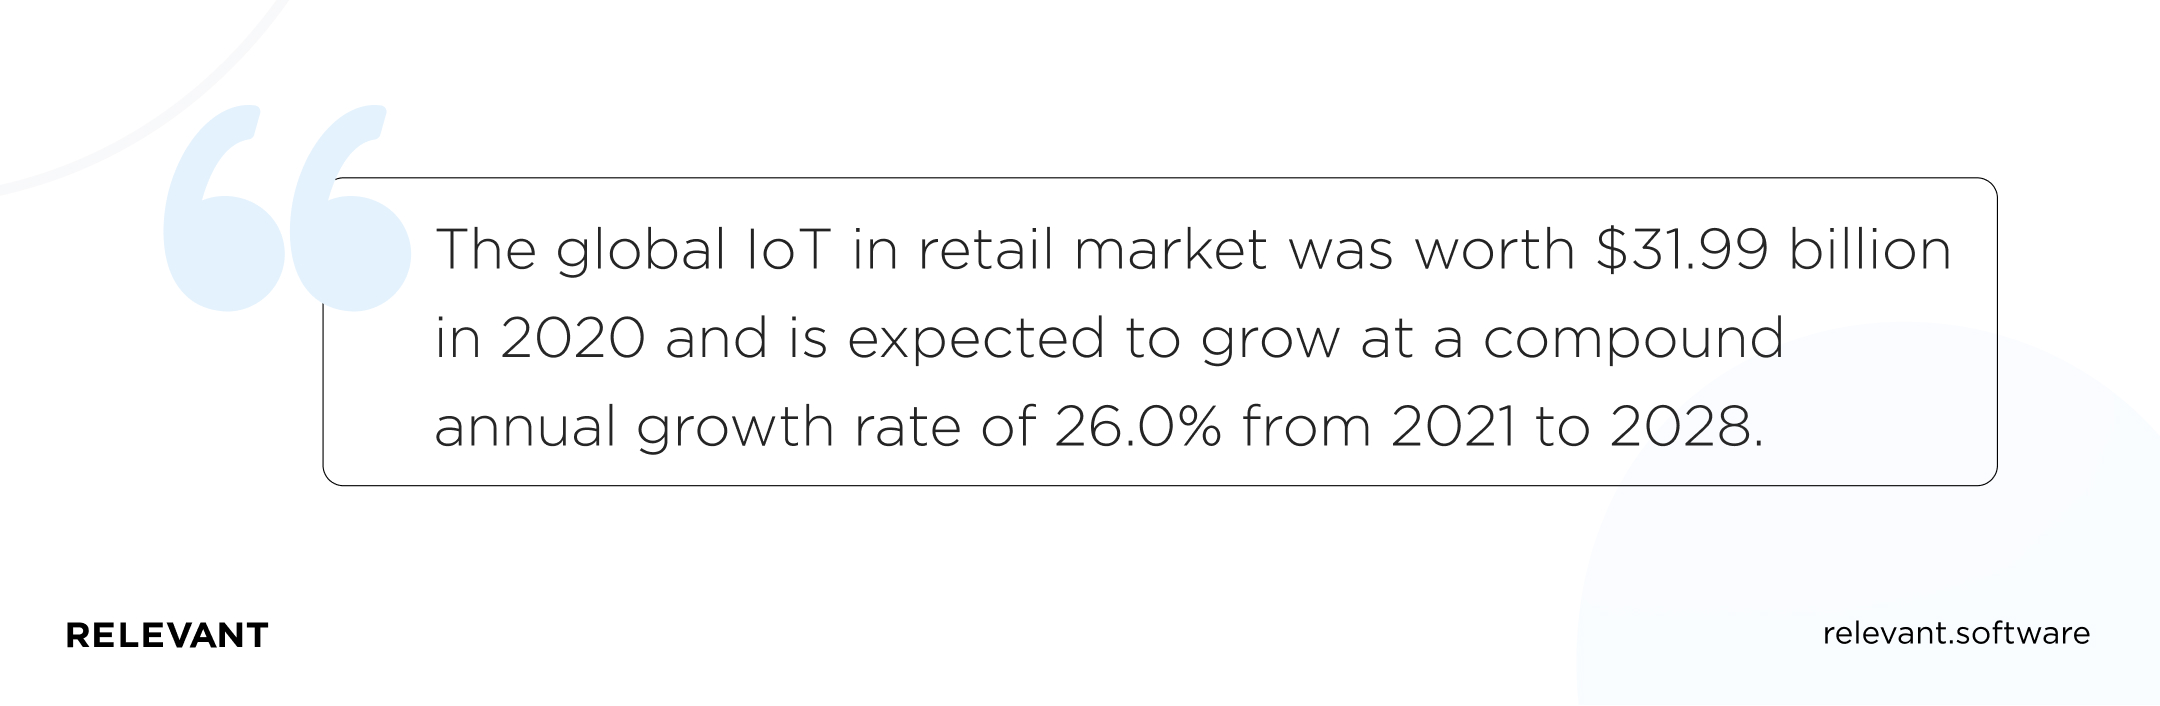 The global IoT in retail from 2021 to 2024-2028